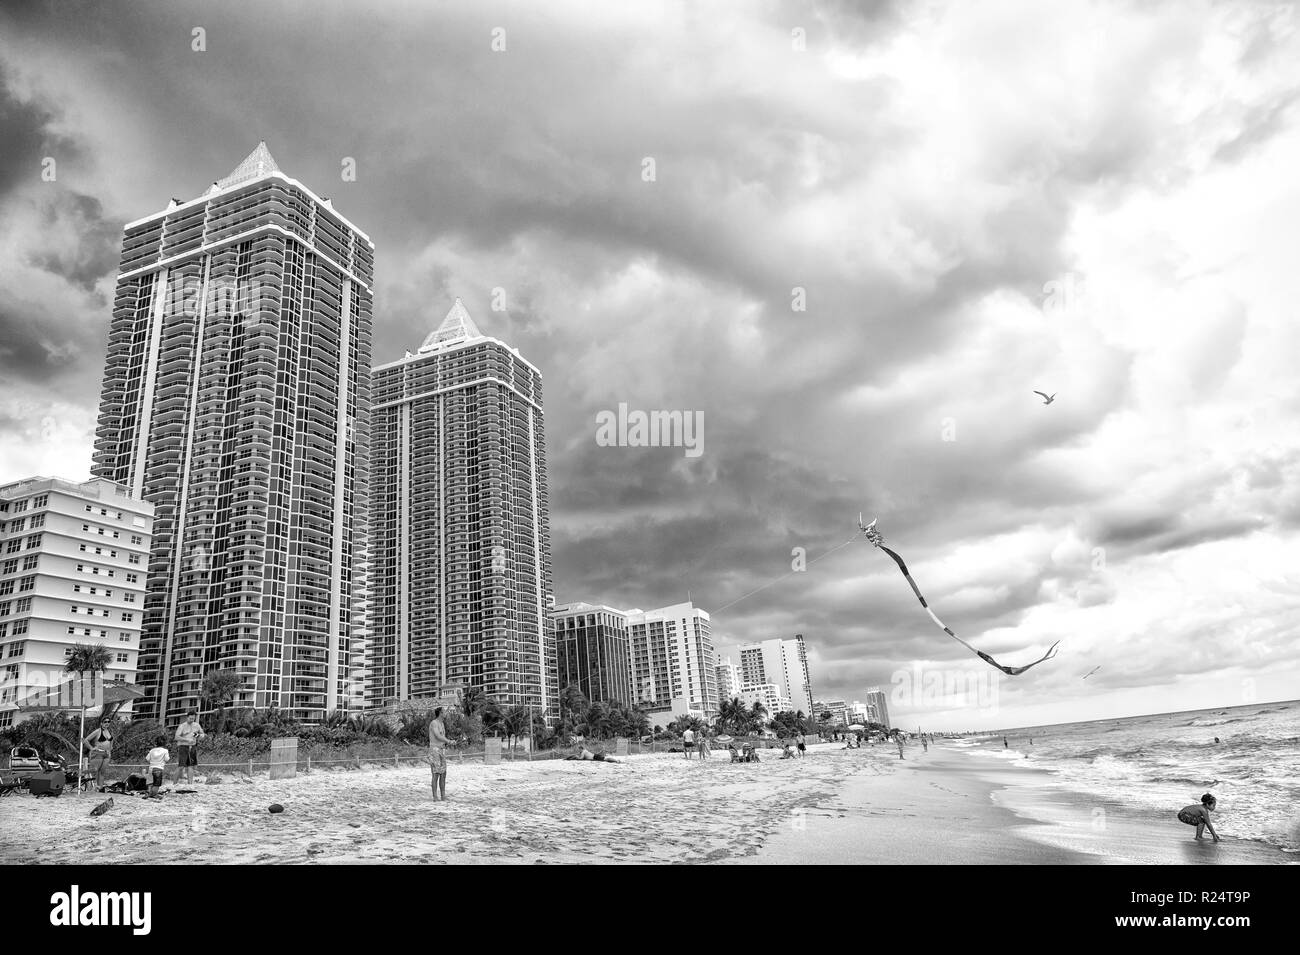 Miami, USA - January 10, 2016: sea beach and kite fly in cloudy sky. south miami beach Architecture and real estate on luxury resort. Summer vacation on sea. Wanderlust or travel. Stock Photo